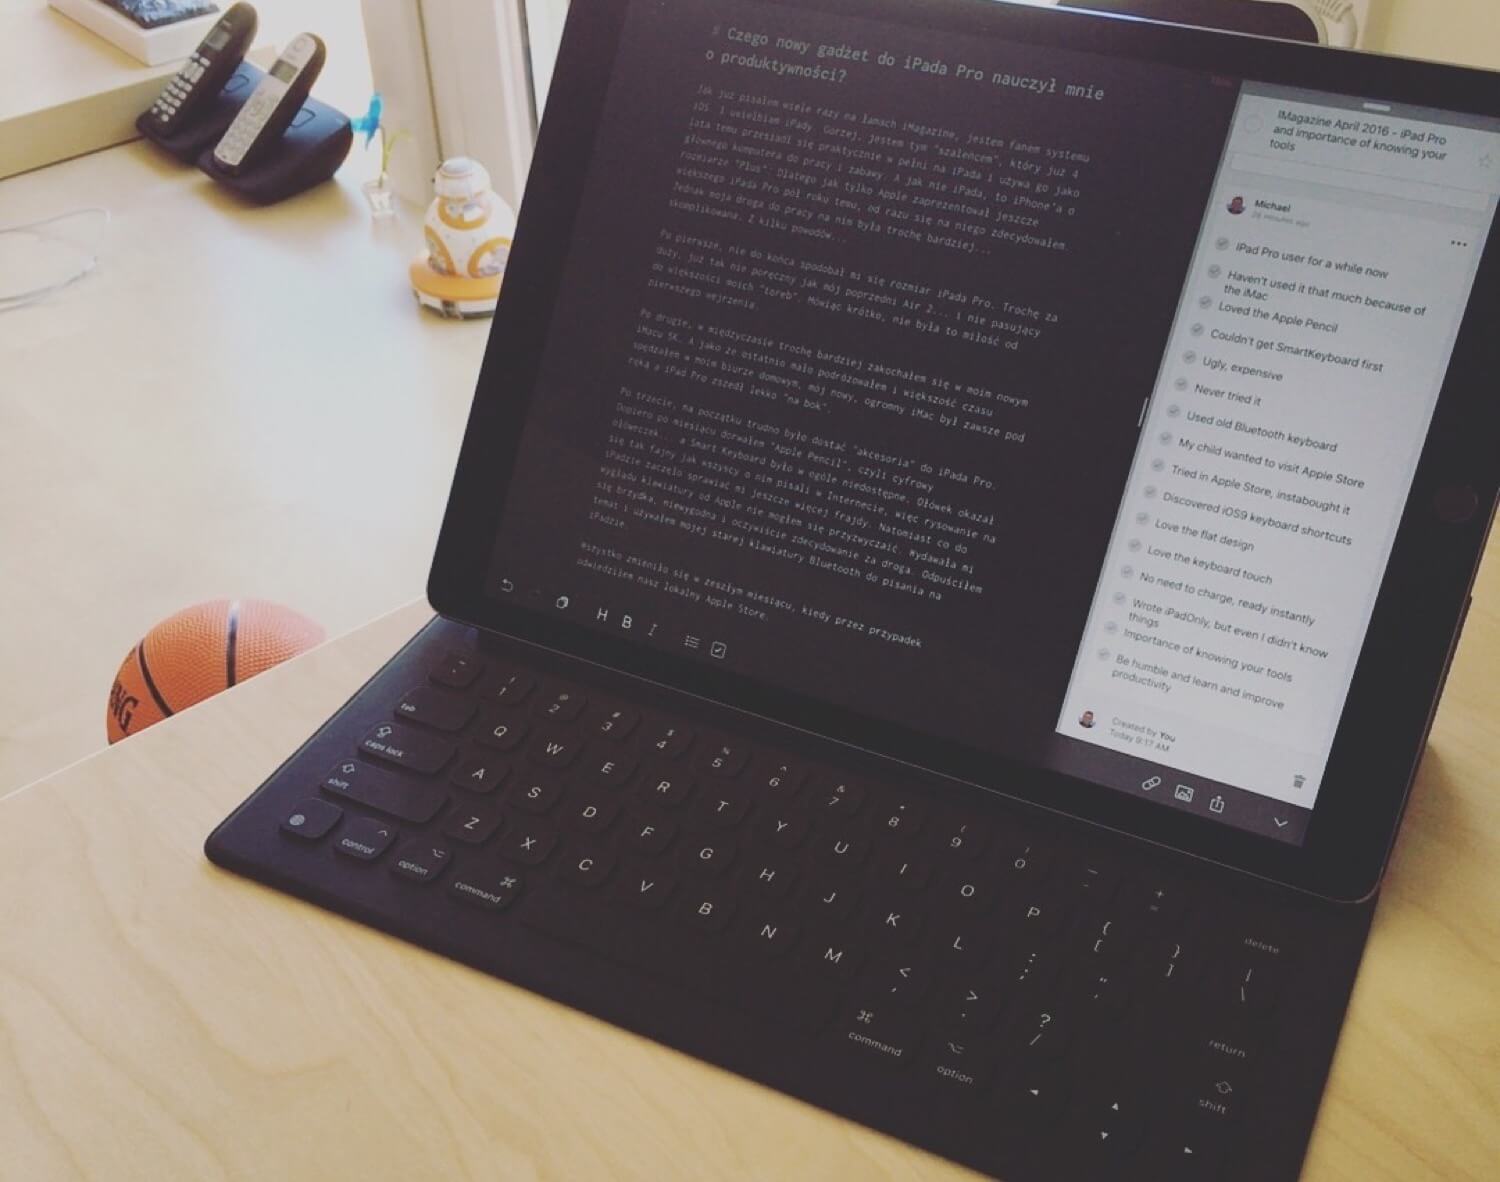 What my new iPad Pro with Smart Keyboard taught me about productivity